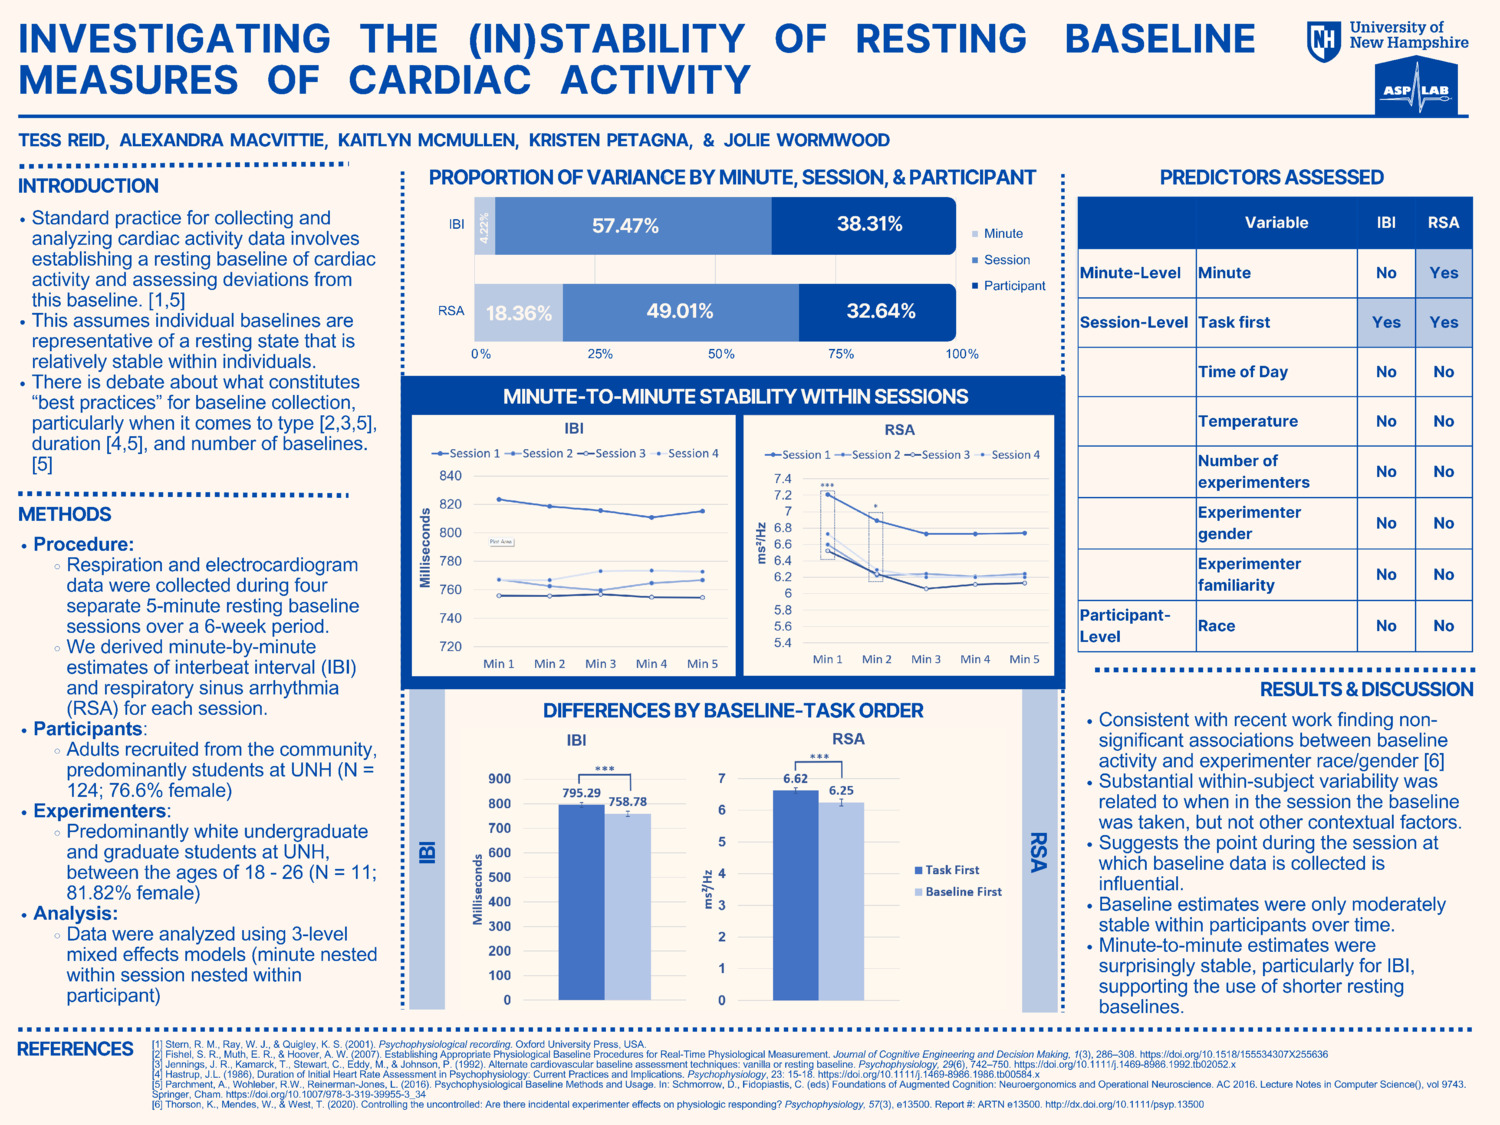 Investigating The (In)Stability Of Resting Baseline Measures Of Cardiac Activity by jbwormwood